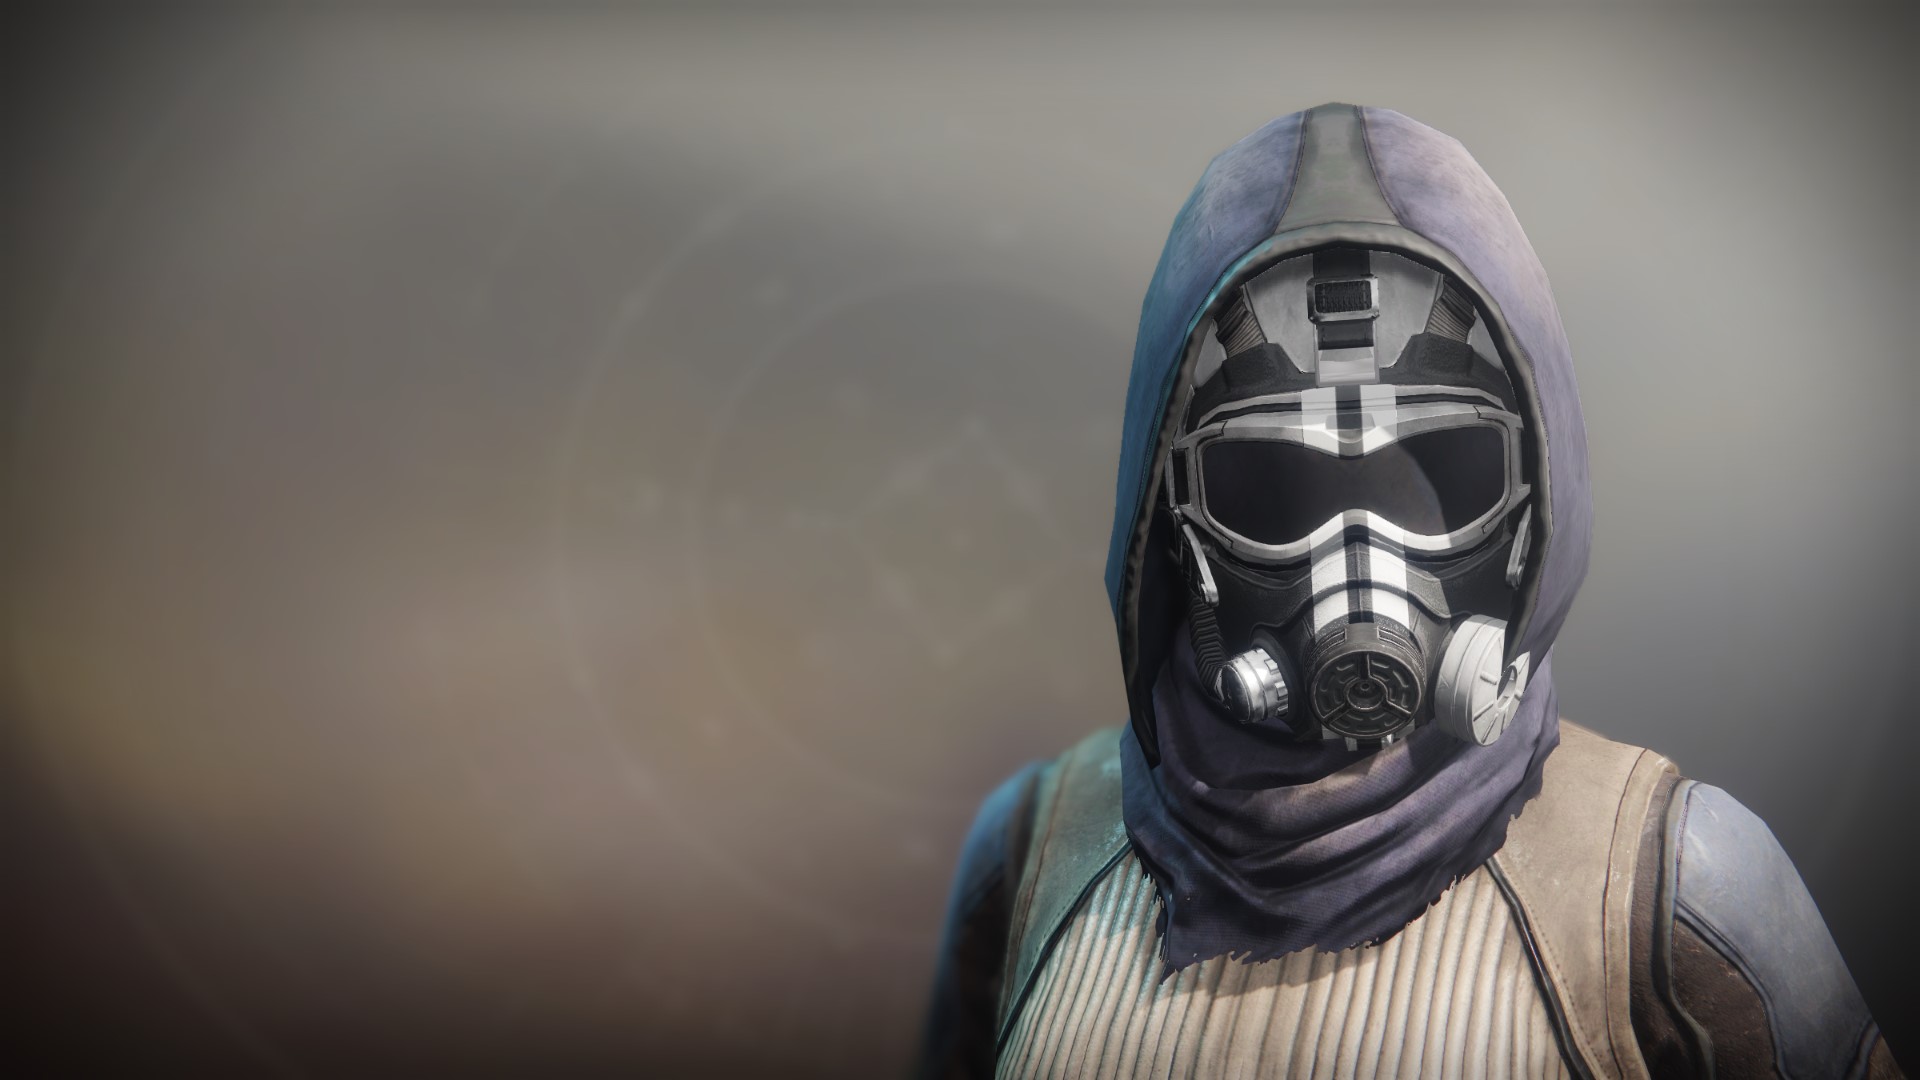 An in-game render of the Anti-Extinction Mask.